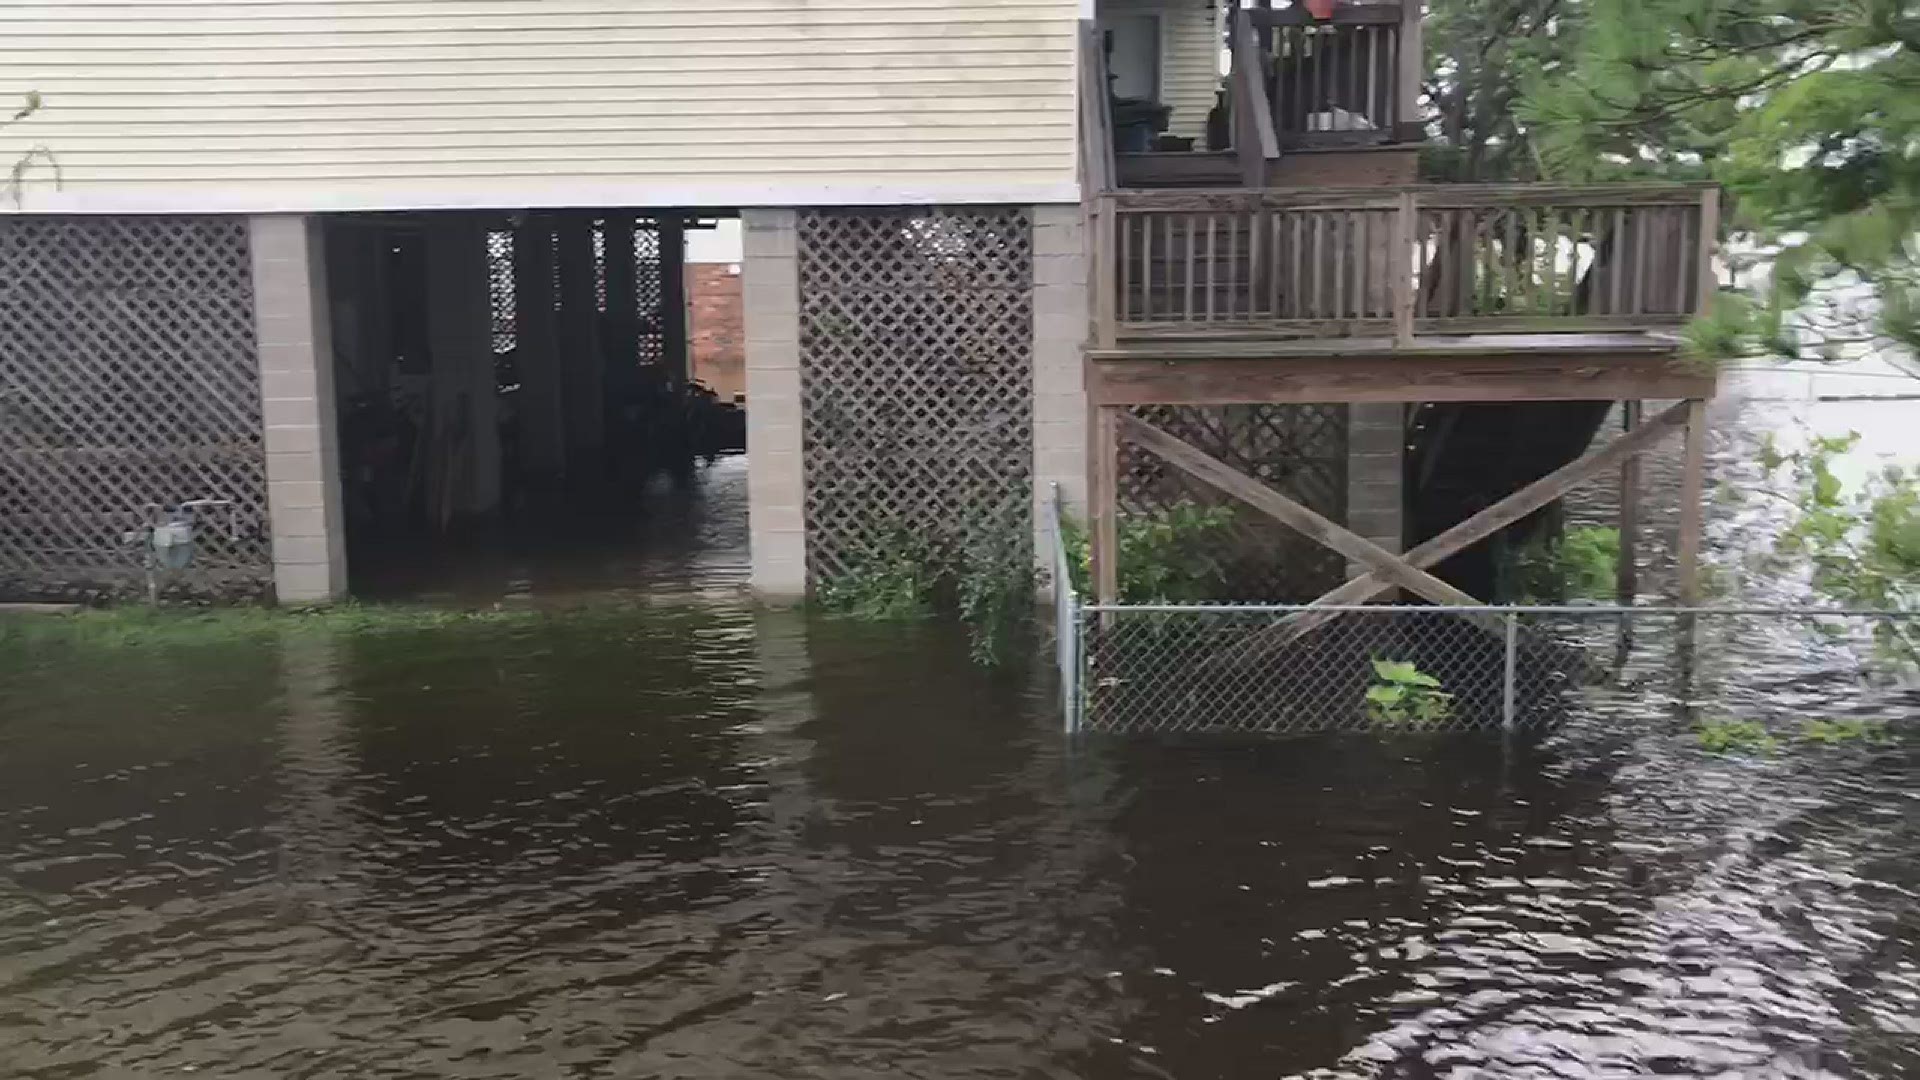 Flooding at my home in Palmlake. This video was taken at 7:00am Monday morning.The water came inside the house
Credit: Lucien Eyraud